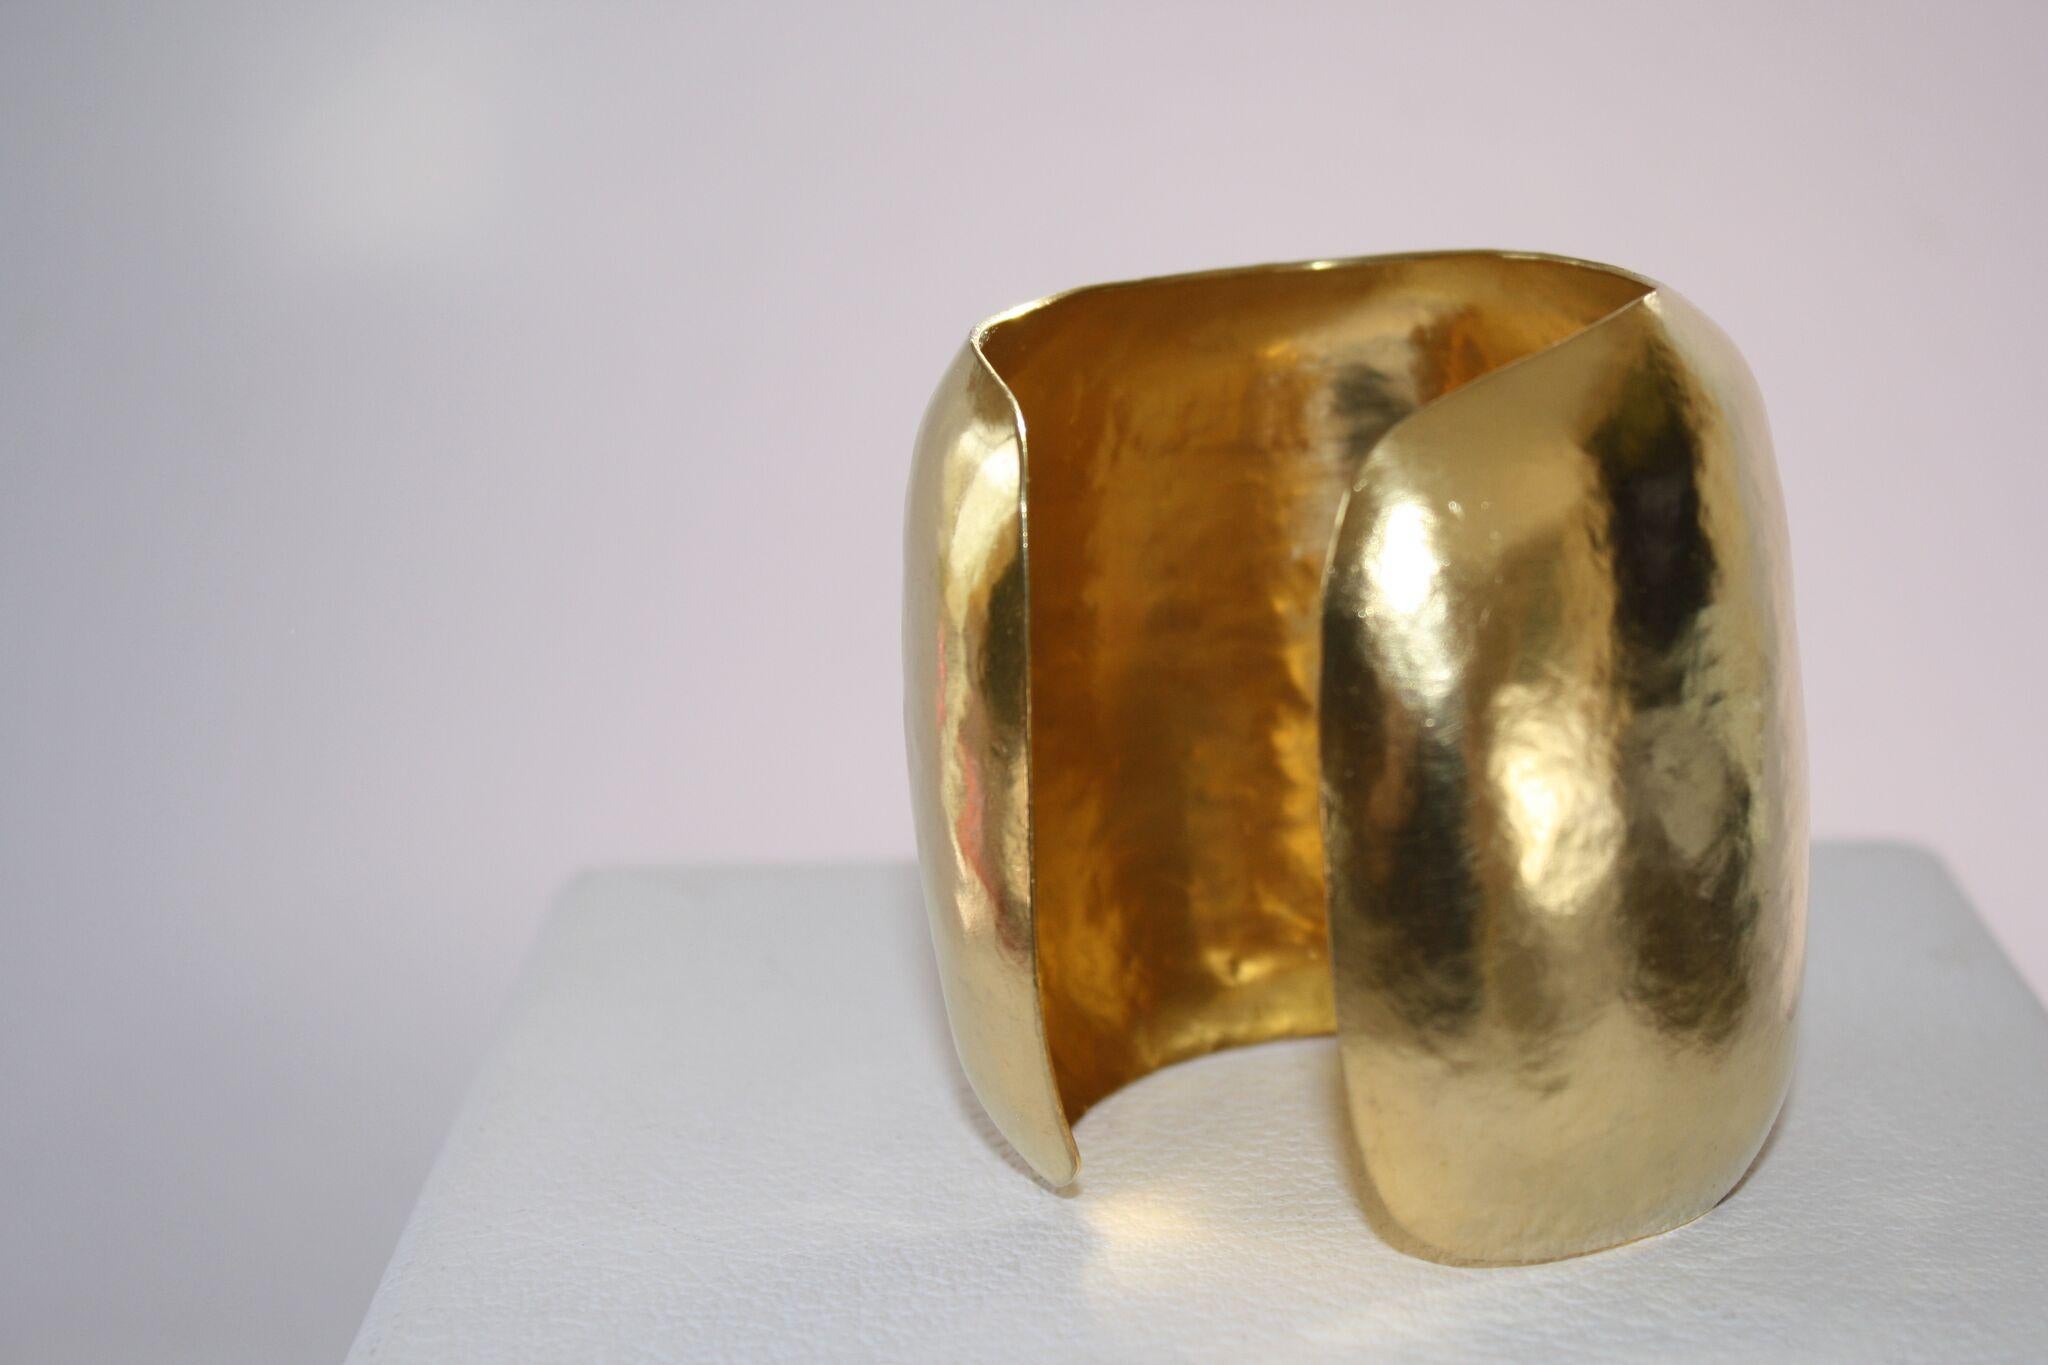 Solid brass plated with 24k gold and hand hammered by Herve van der Straeten. This iconic designer is no longer producing jewelry, making all remaining pieces collectors items. 
3 “ tall 
2” diameter
flexible vintage 